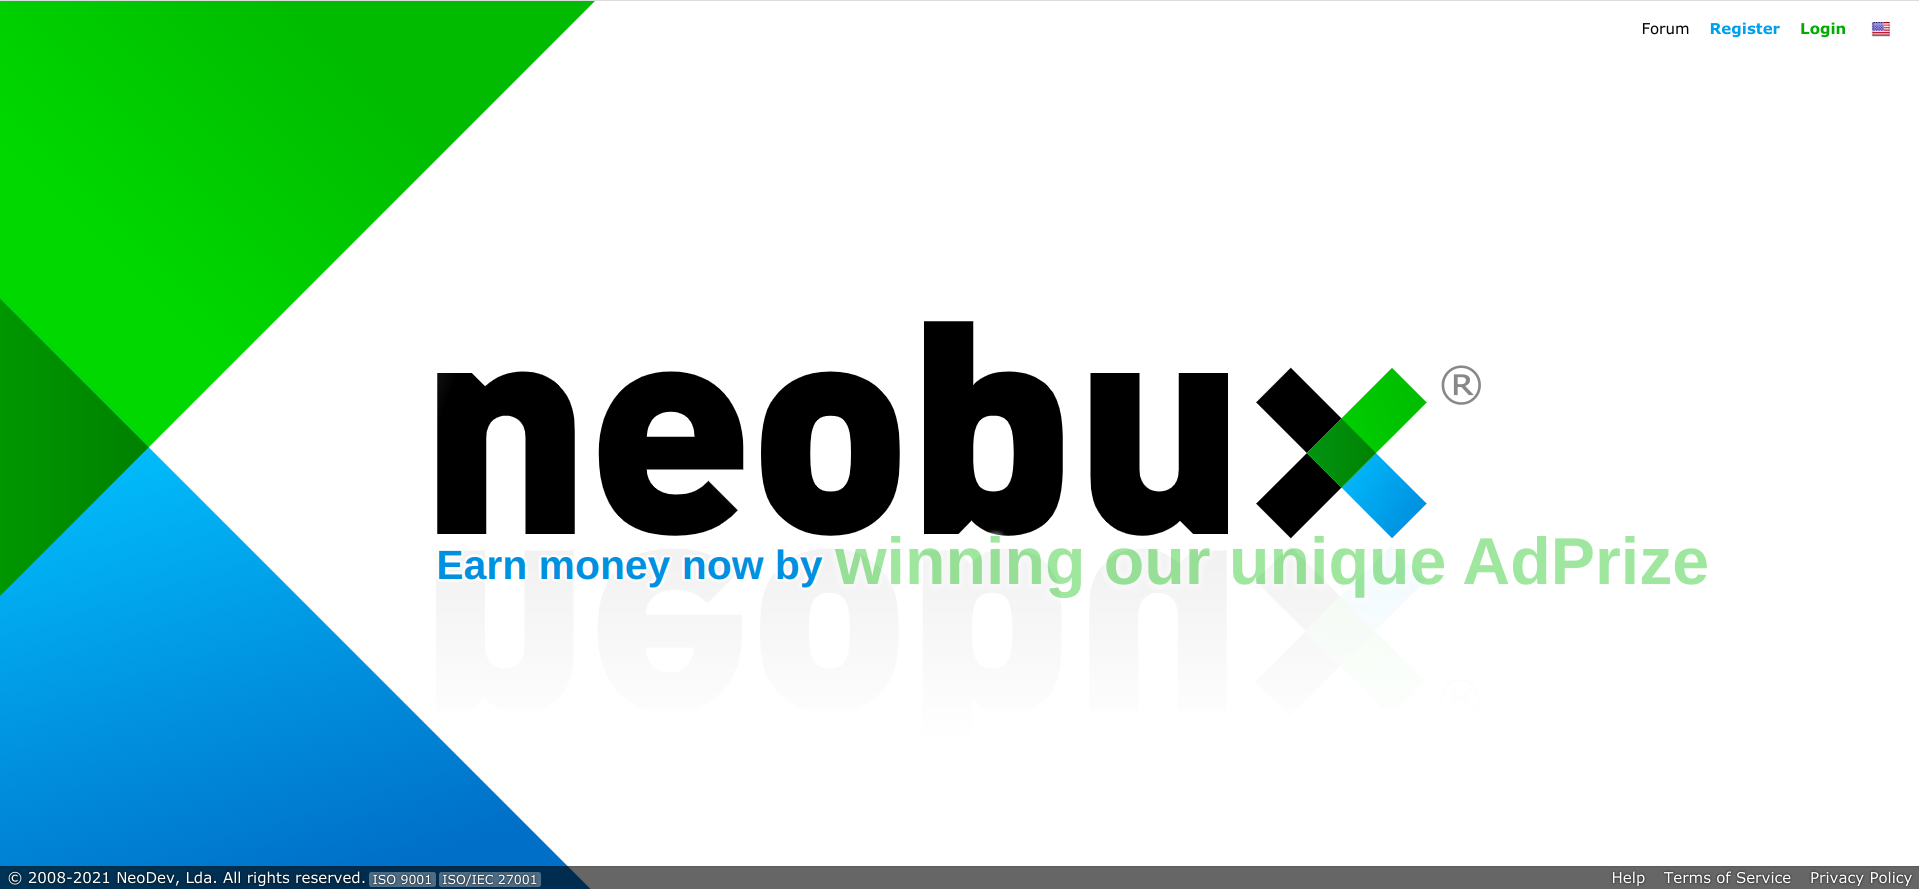 Is Neobux a Scam or Legit